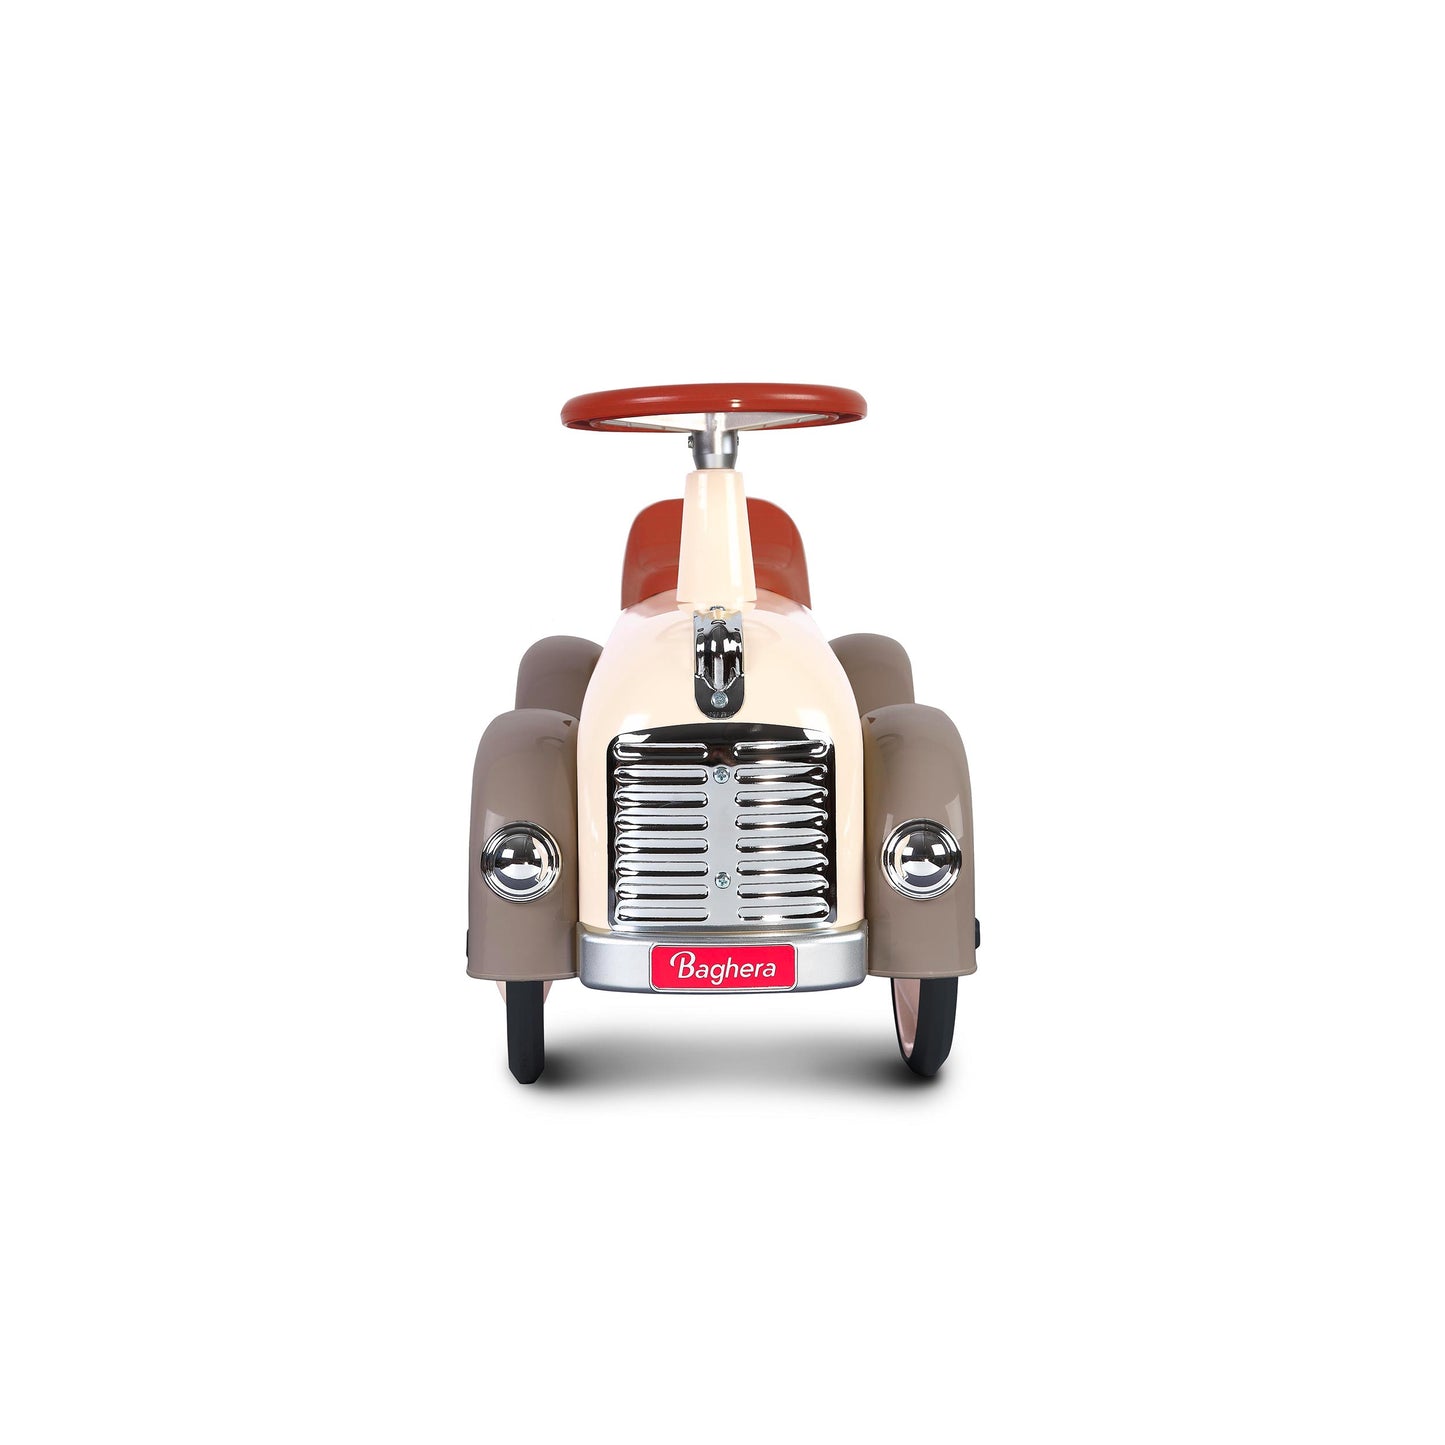 childrens ride on toy uk